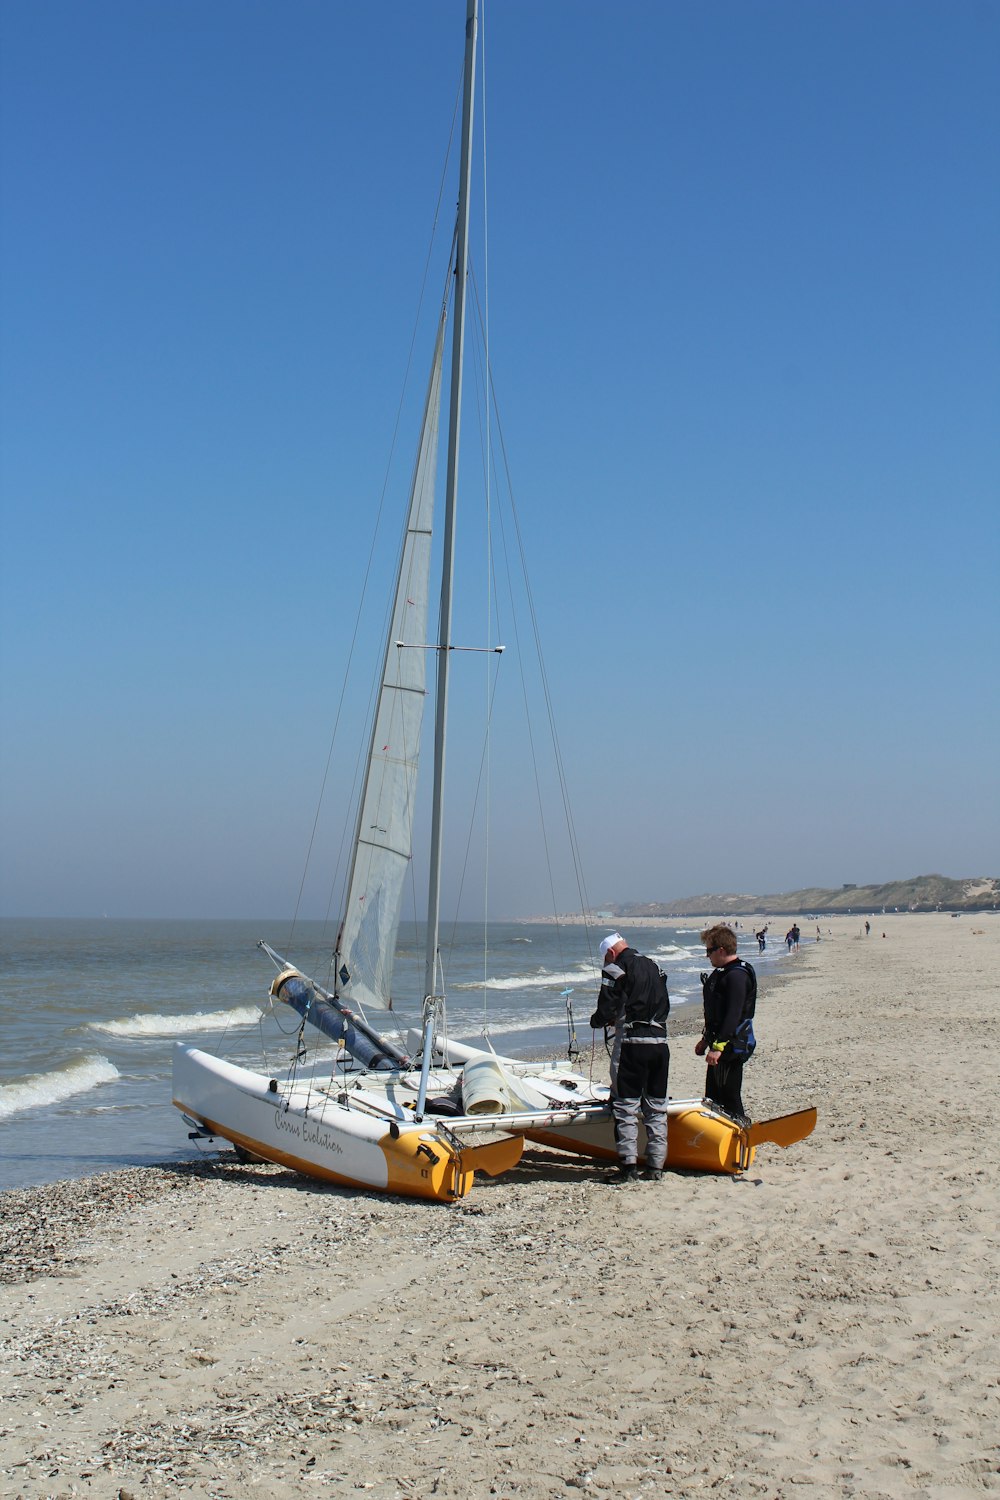 man in black shirt sitting on white and yellow sail boat on sea shore during daytime